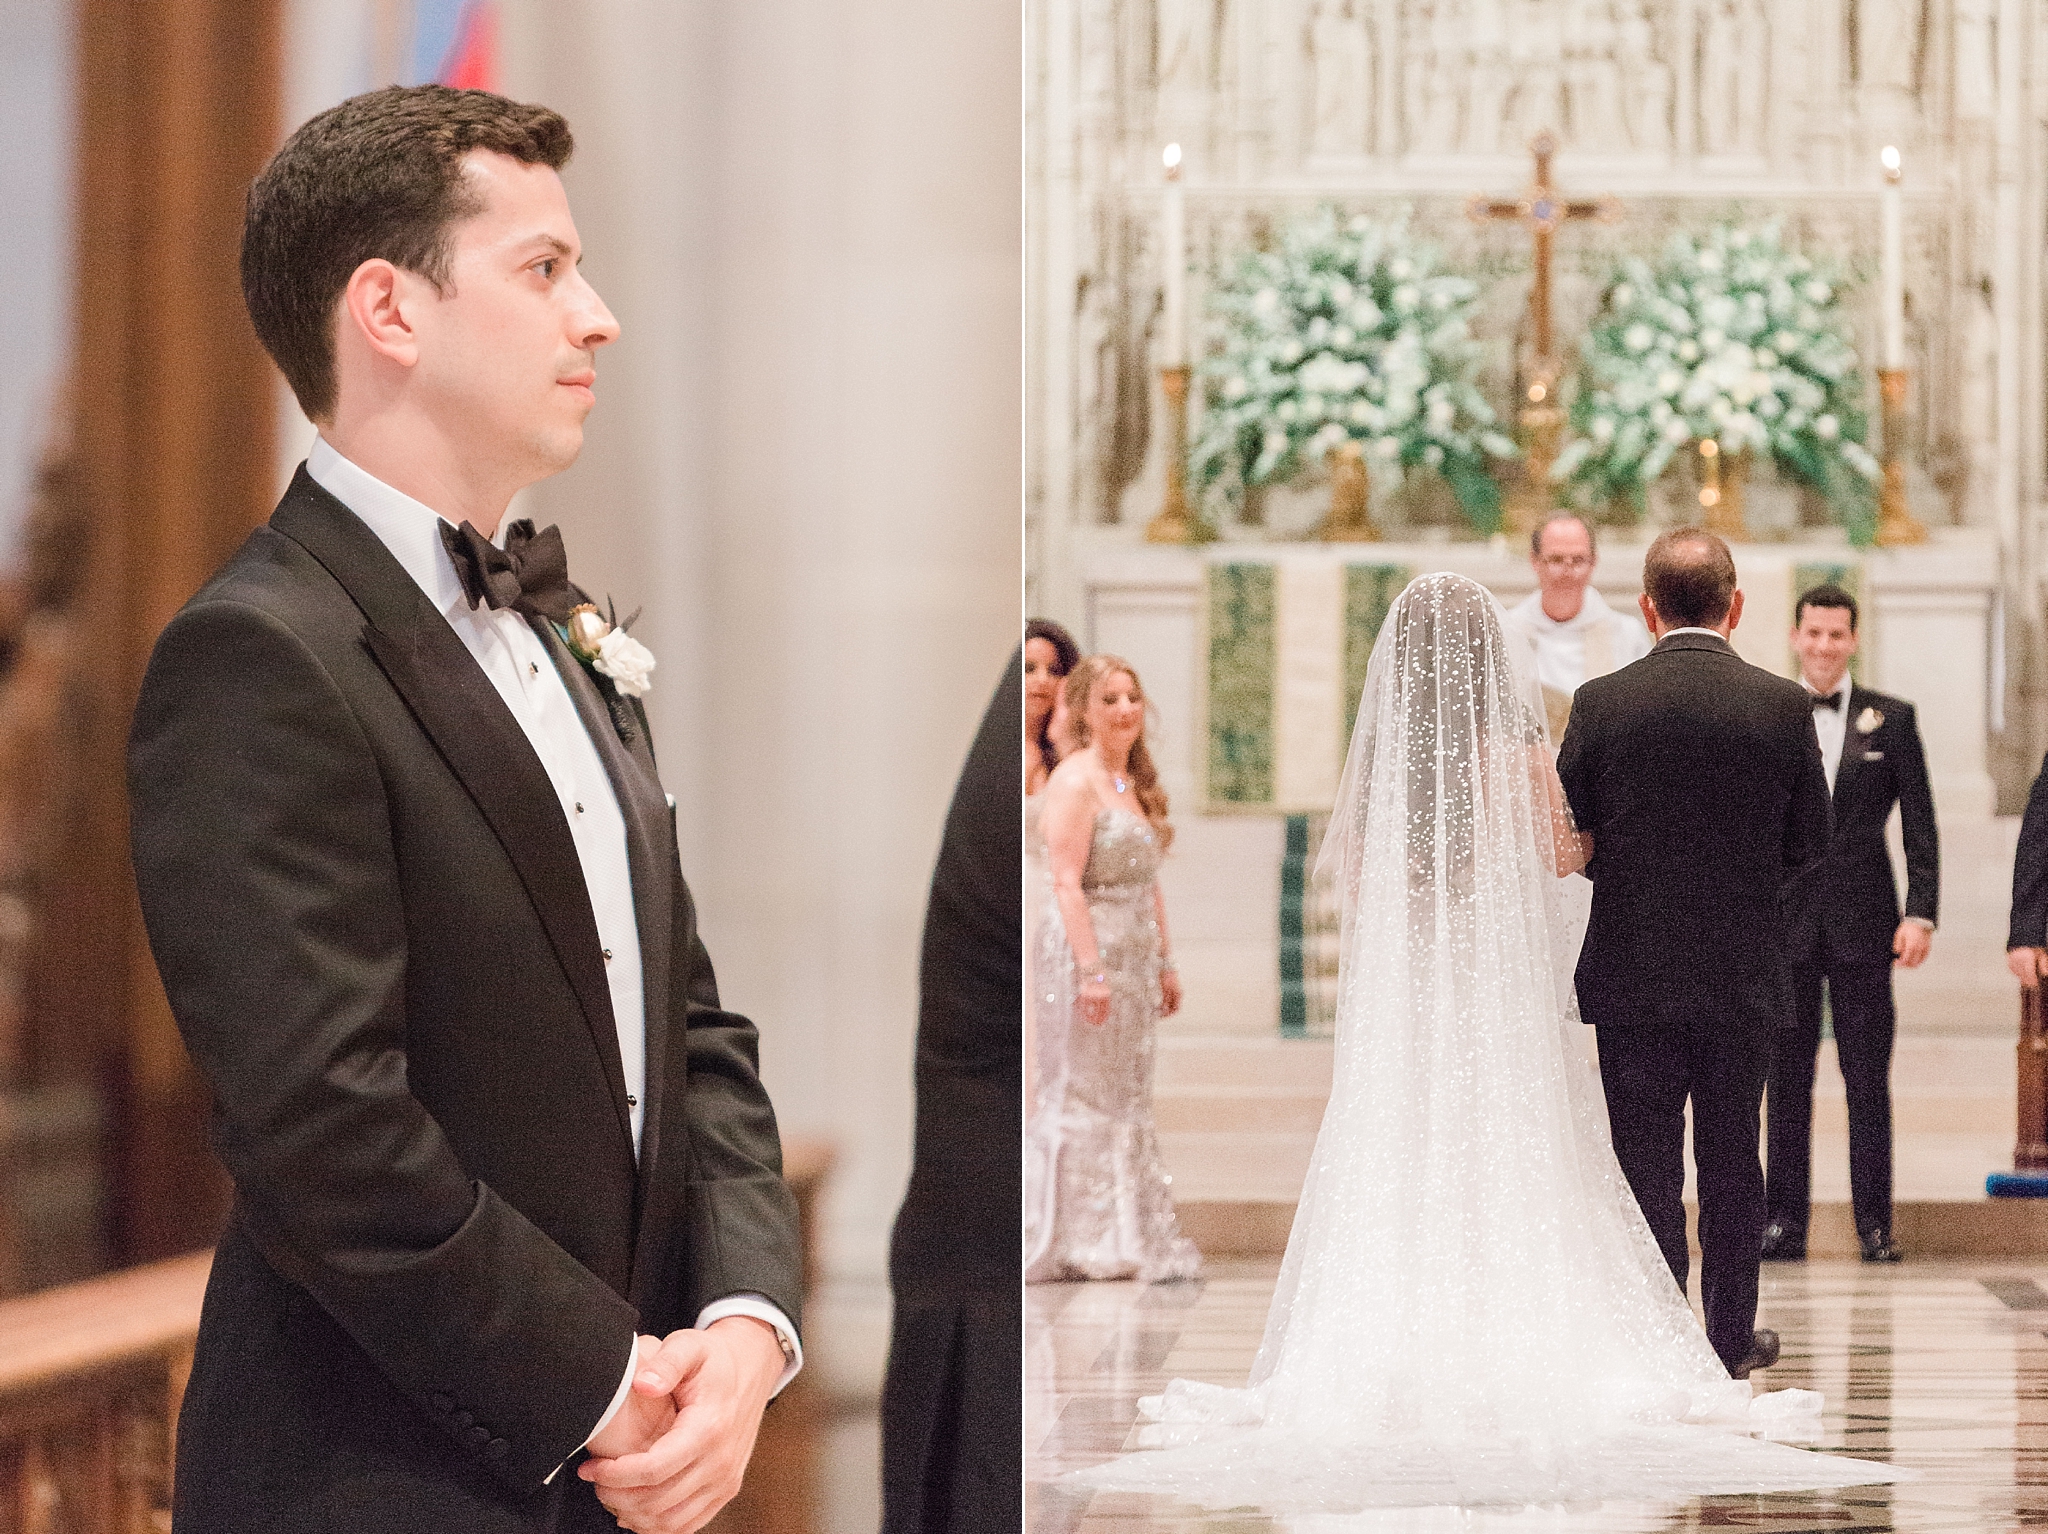 This glamorous summer wedding at the iconic Washington National Cathedral in Washington, DC features a palette of blush and gold.